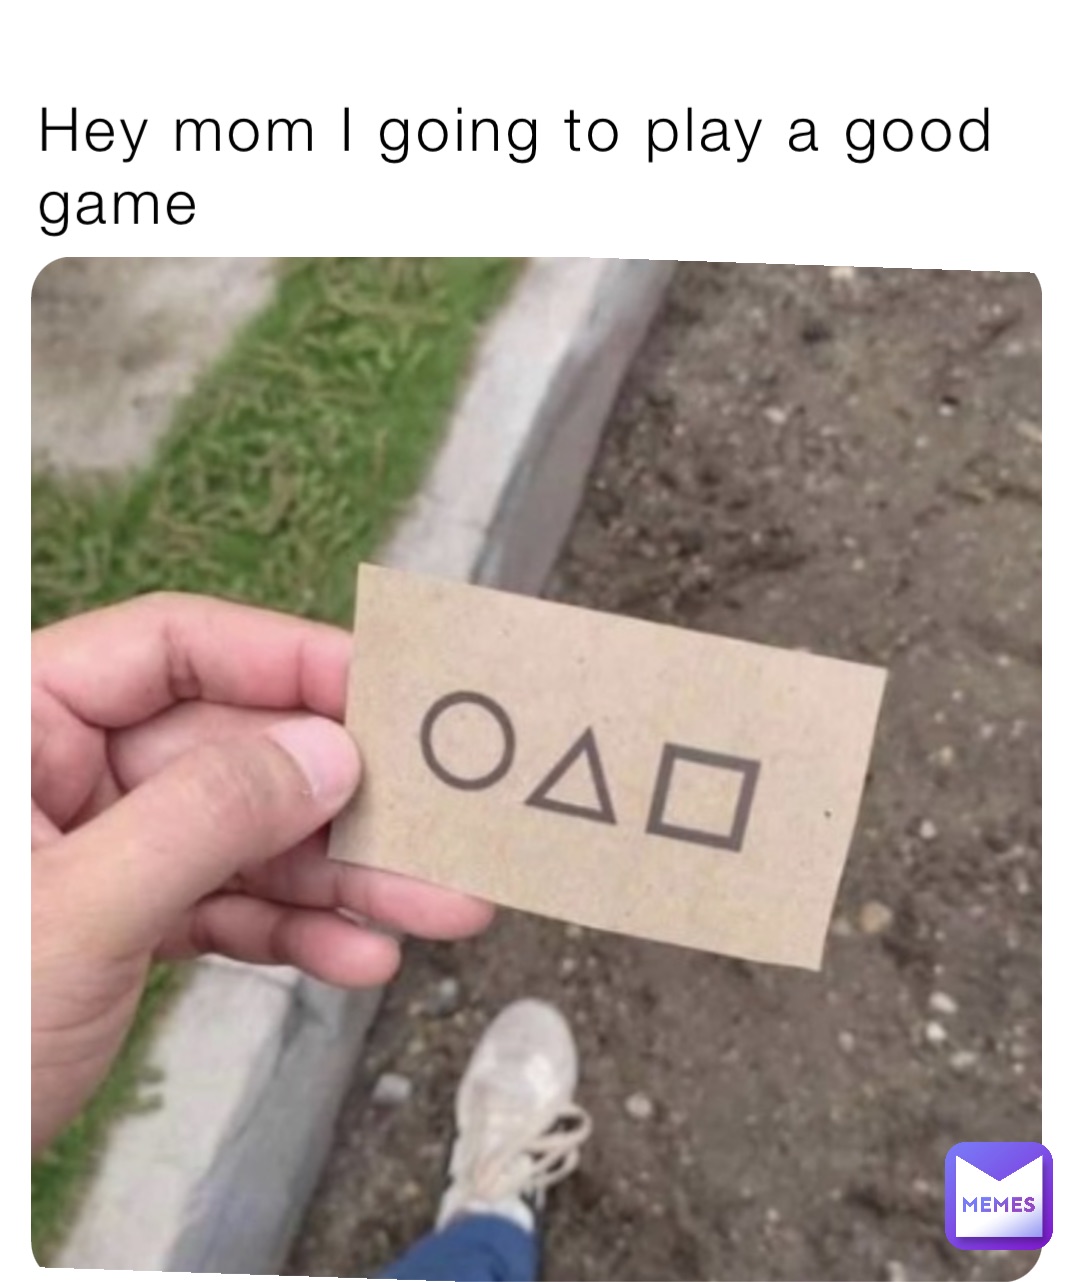 Hey mom I going to play a good game